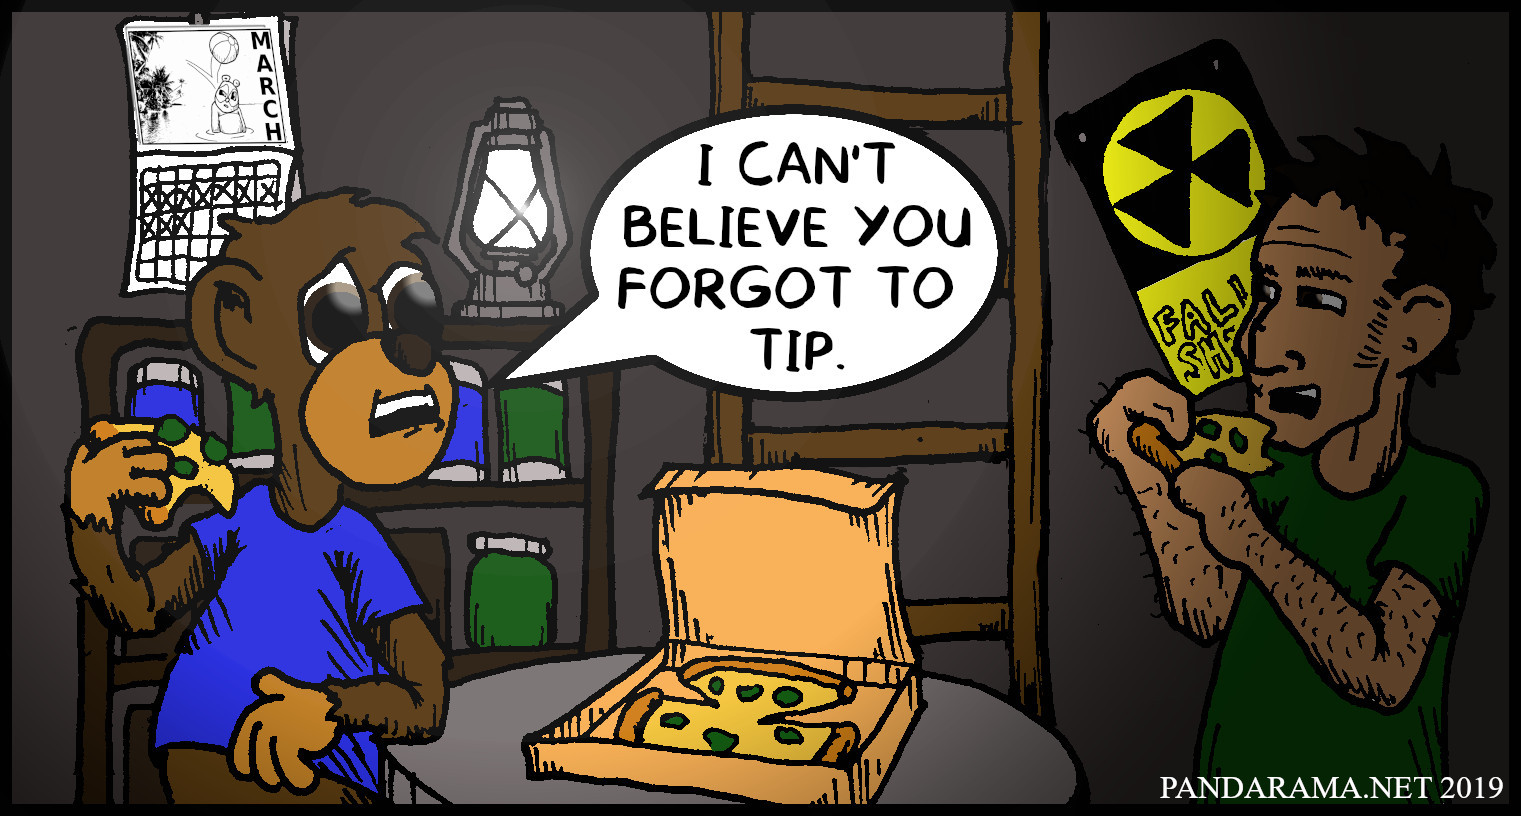 pizza delivered to fallout shelter, but no tip.